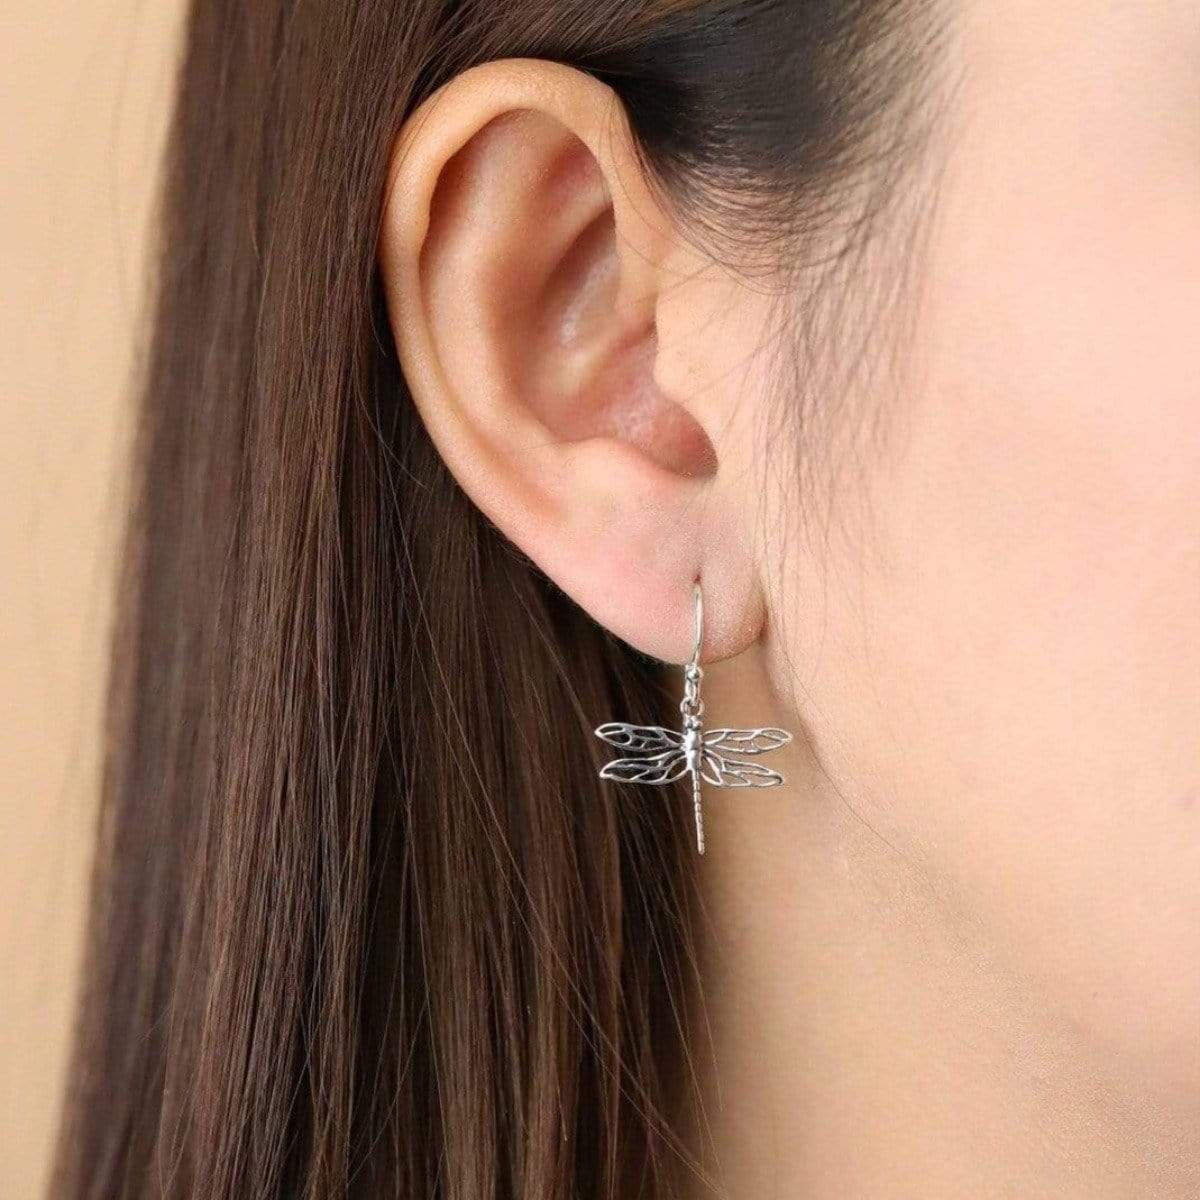 Boma Sterling Silver Earrings - Dragonfly    